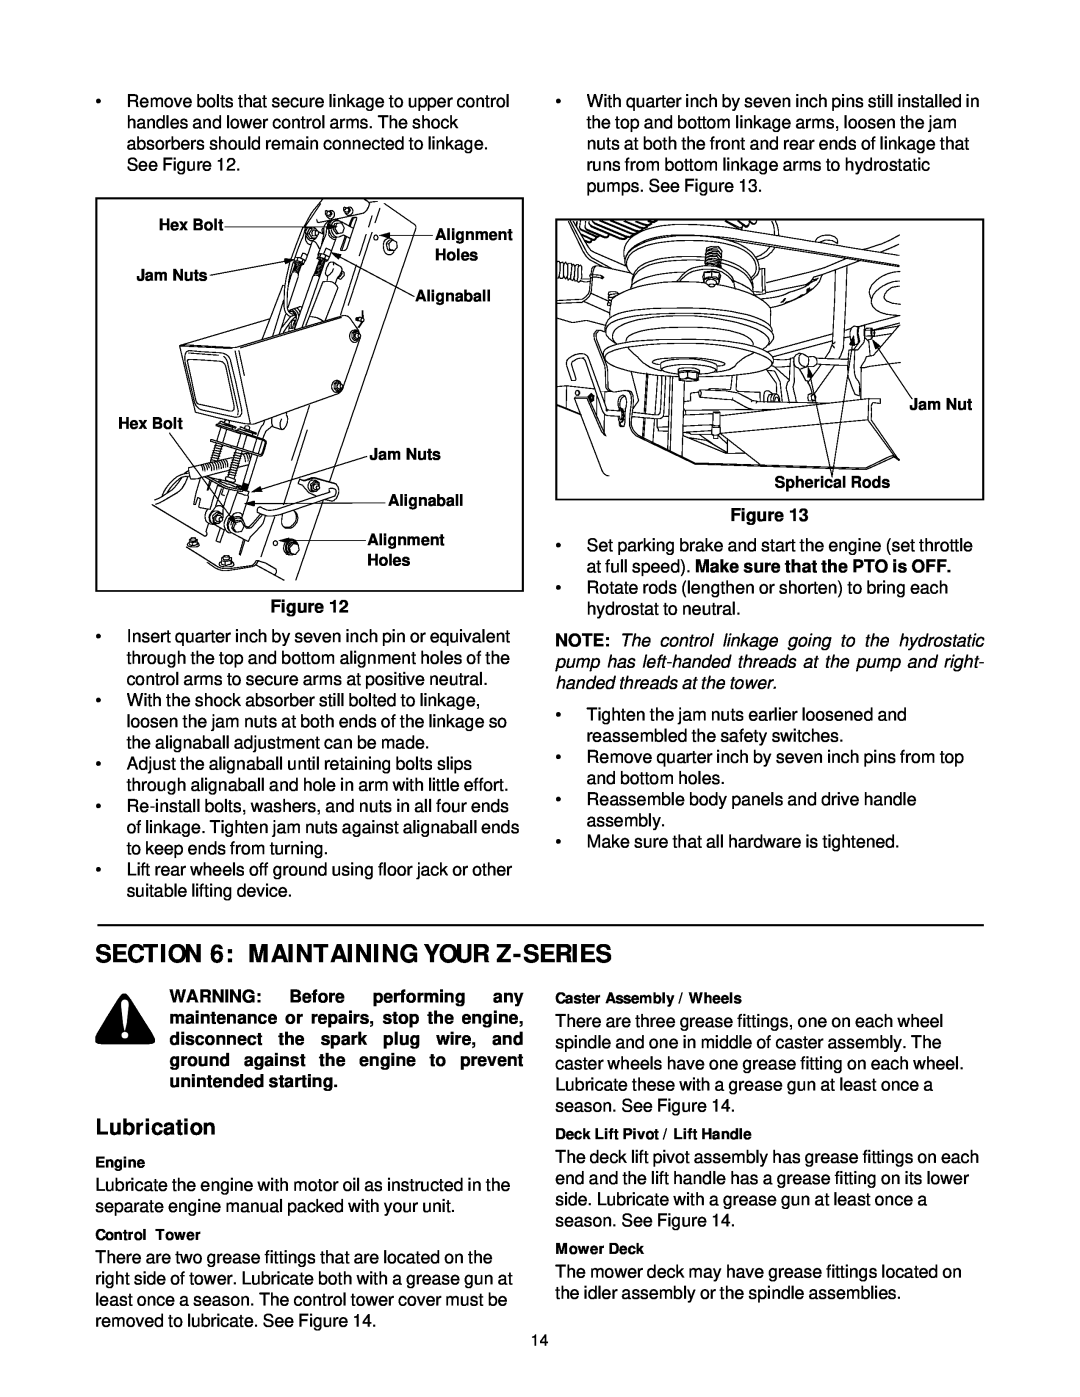 Yard-Man 53AA1A3G401 Maintaining Your Z-Series, Lubrication, Engine, Control Tower, Caster Assembly / Wheels, Mower Deck 